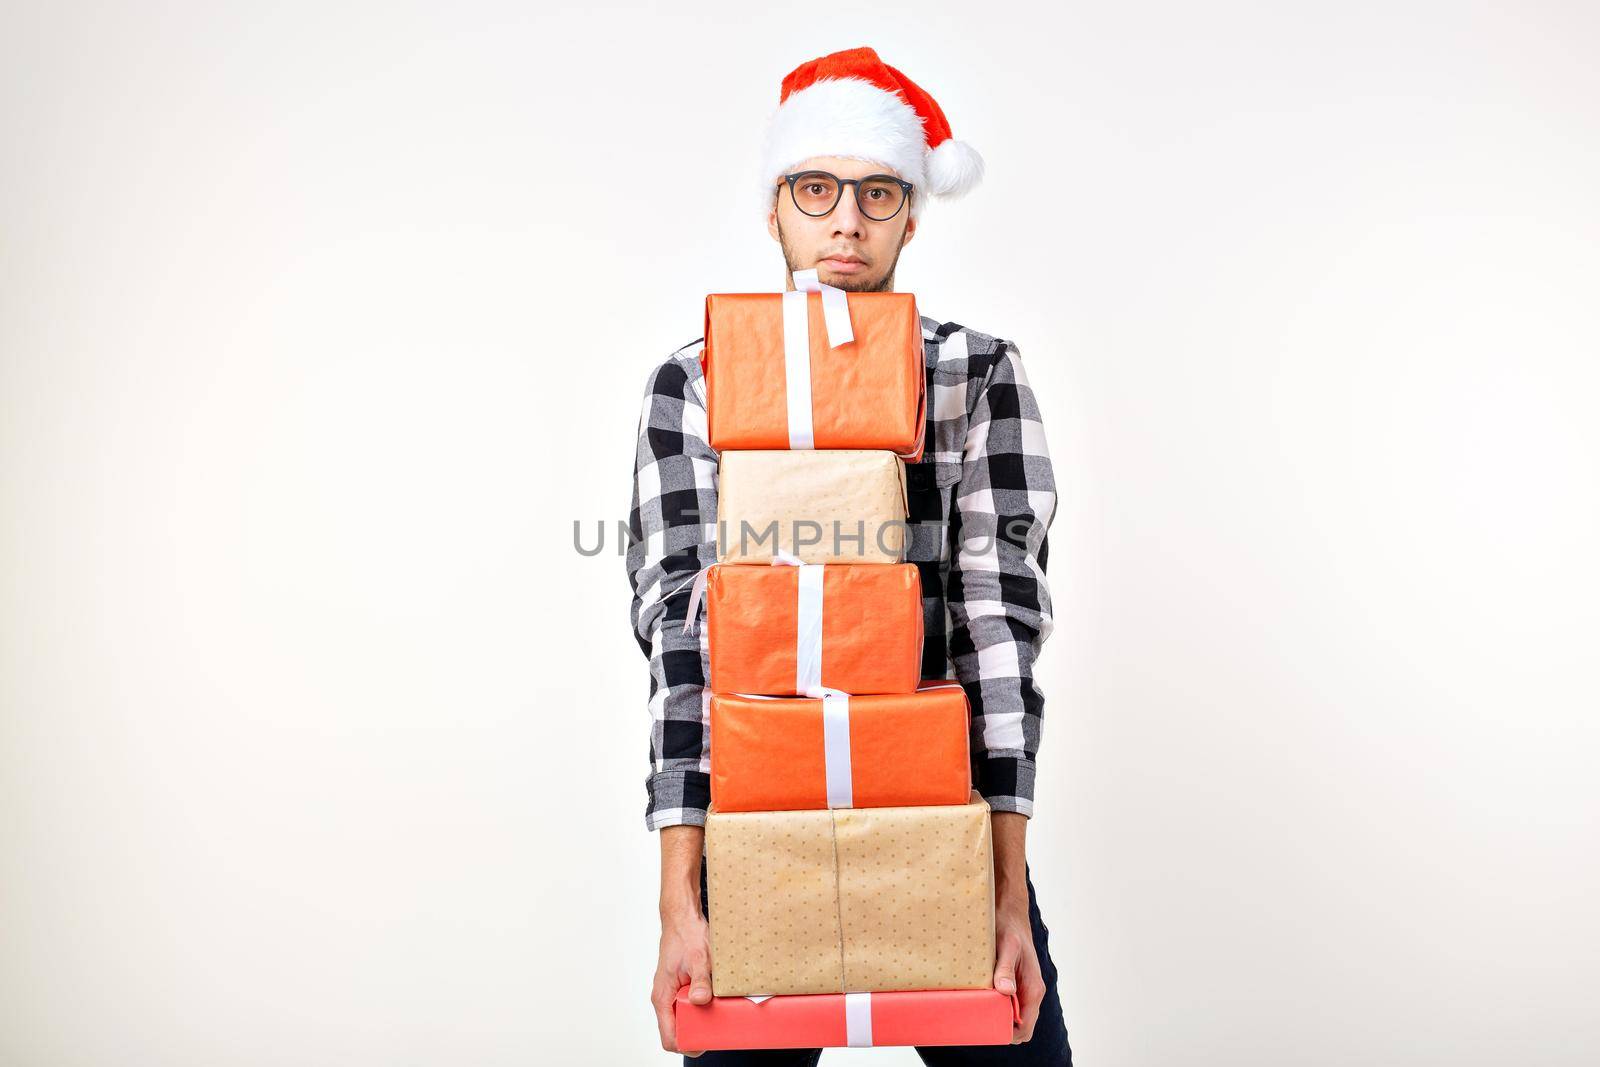 Holidays and presents concept - Funny man in Christmas hat holding many gift boxes on white background with copy space by Satura86